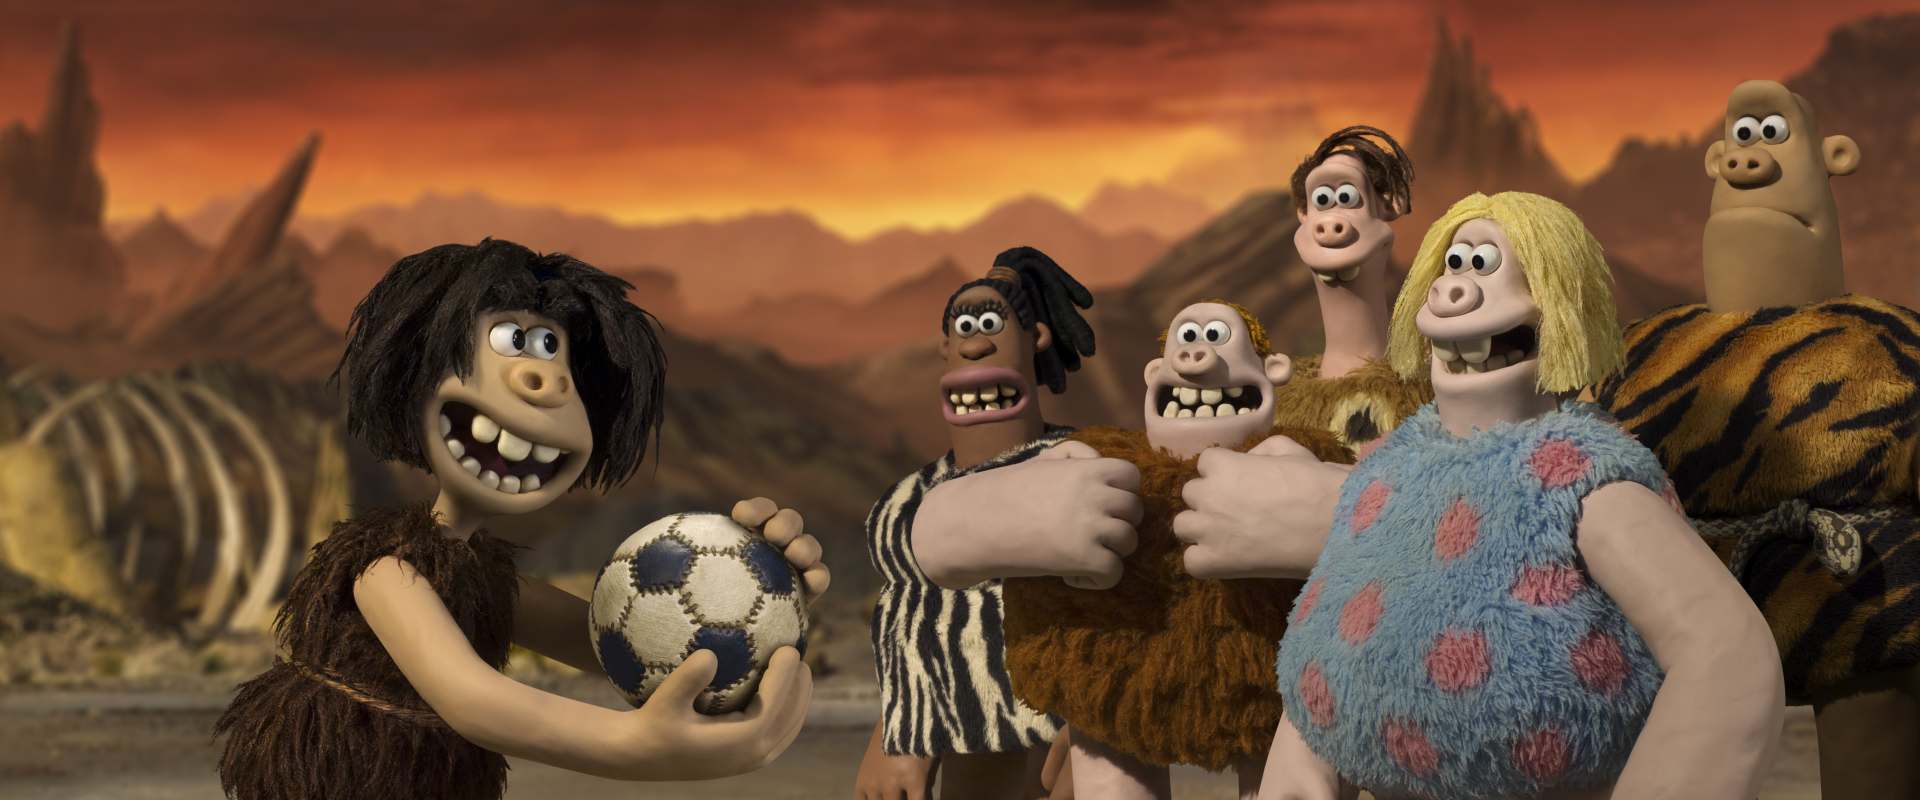 Early Man background 2